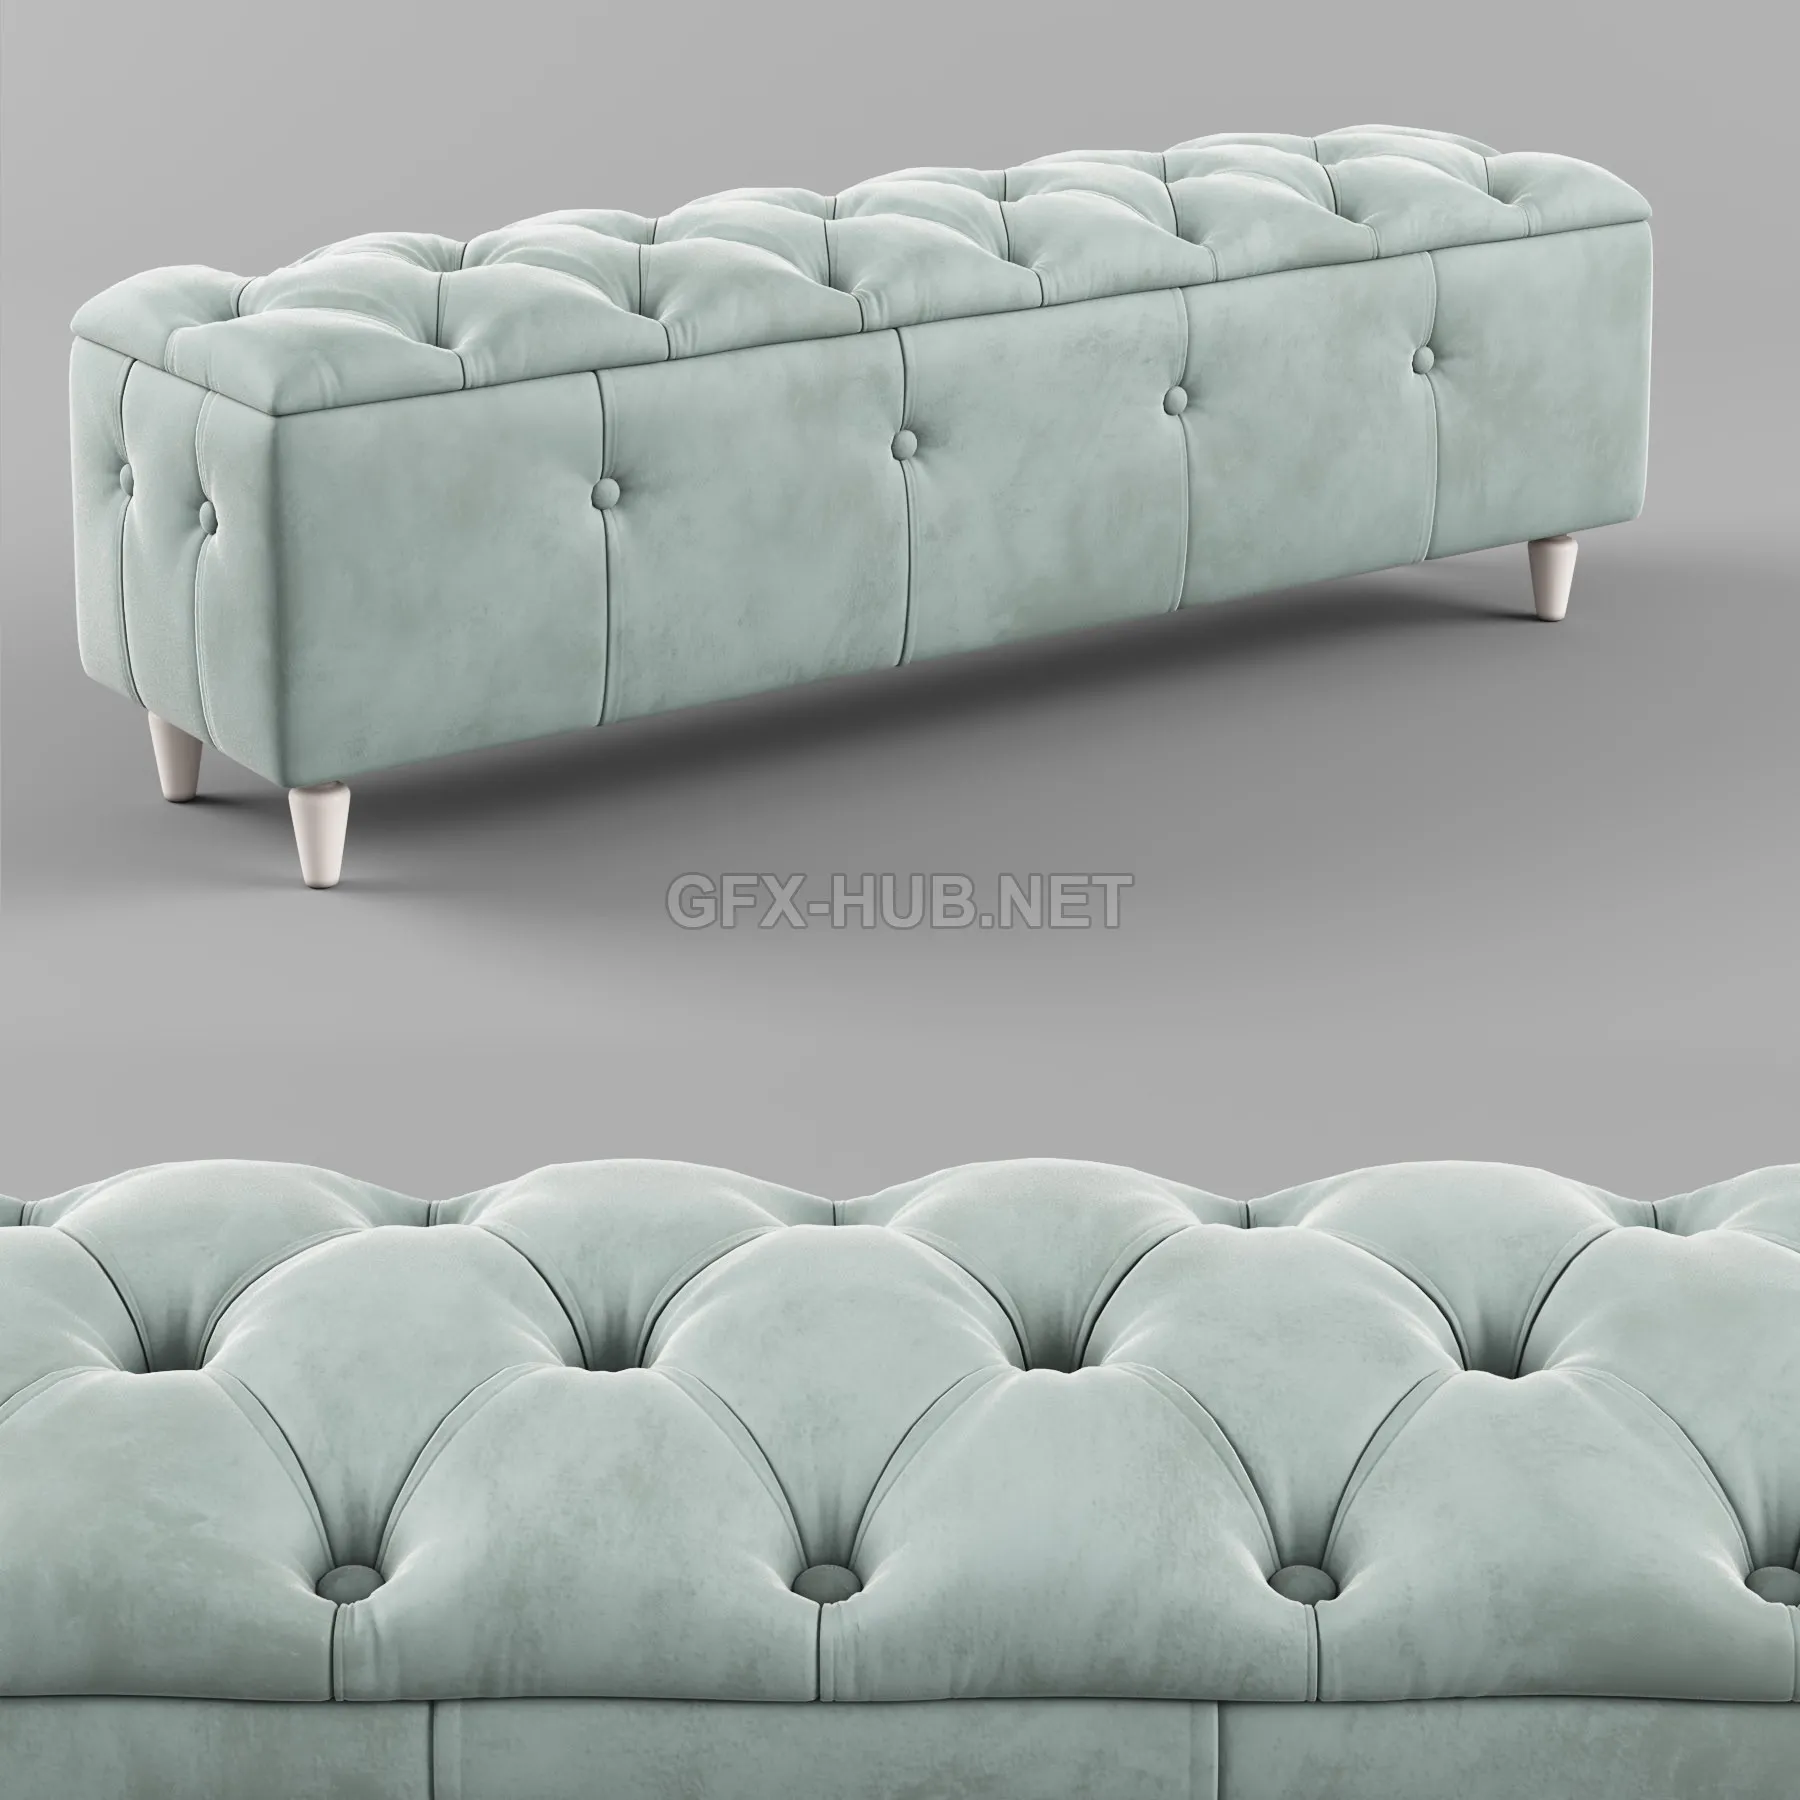 FURNITURE 3D MODELS – Classic Upholstered Fabric Pouf